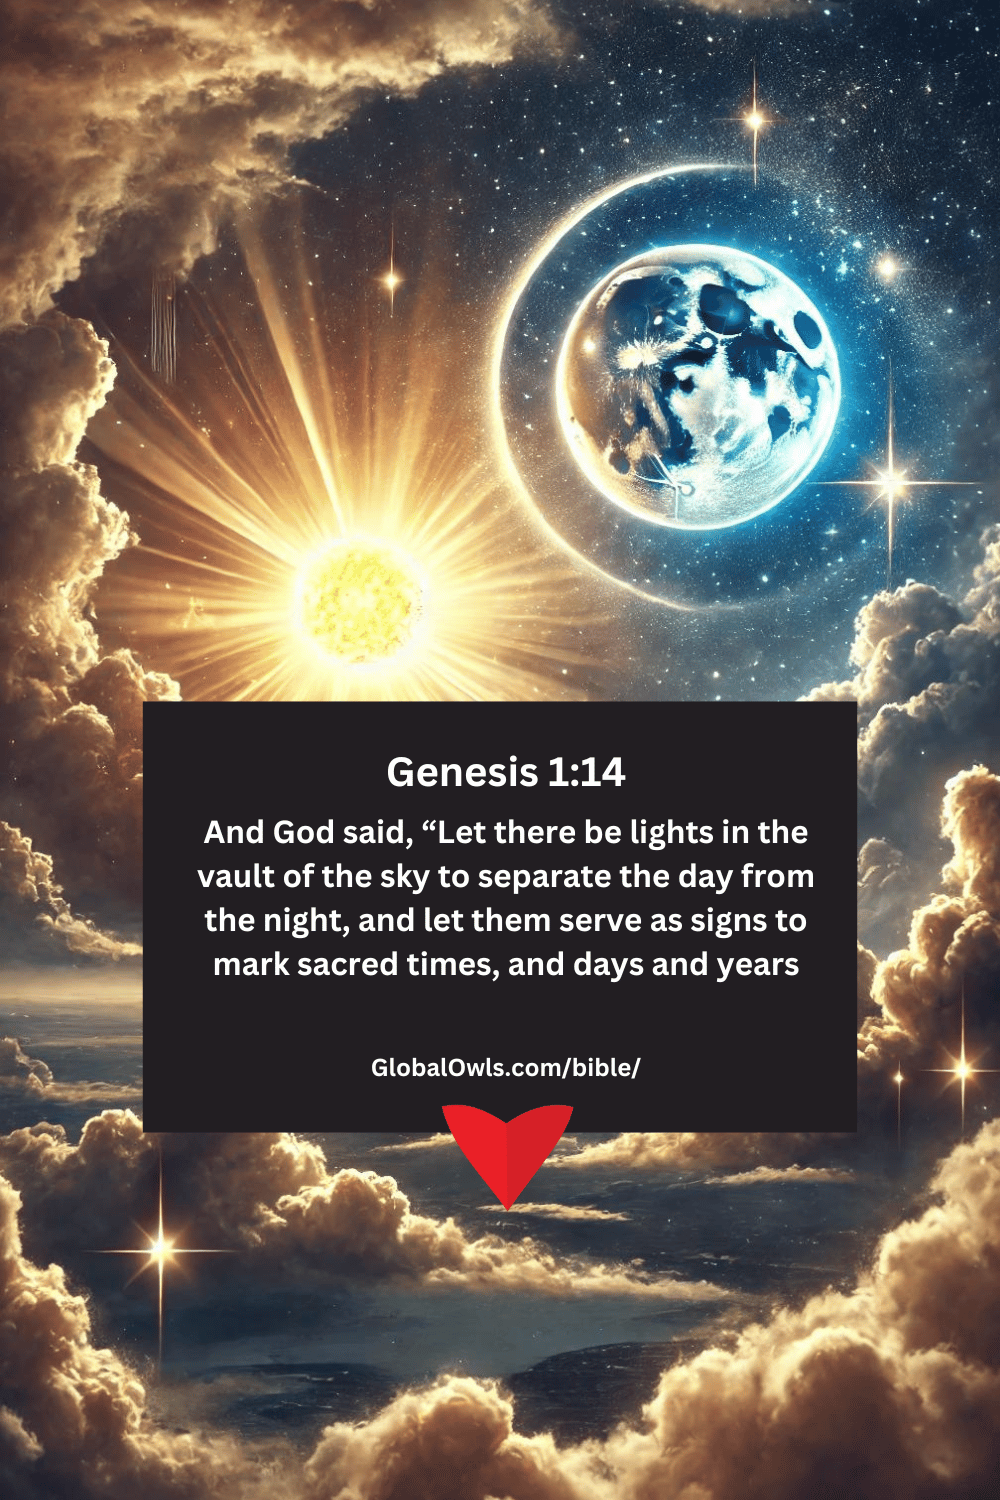 Genesis 1-14 And God said, “Let there be lights in the vault of the sky to separate the day from the night, and let them serve as signs to mark sacred times, and days and years